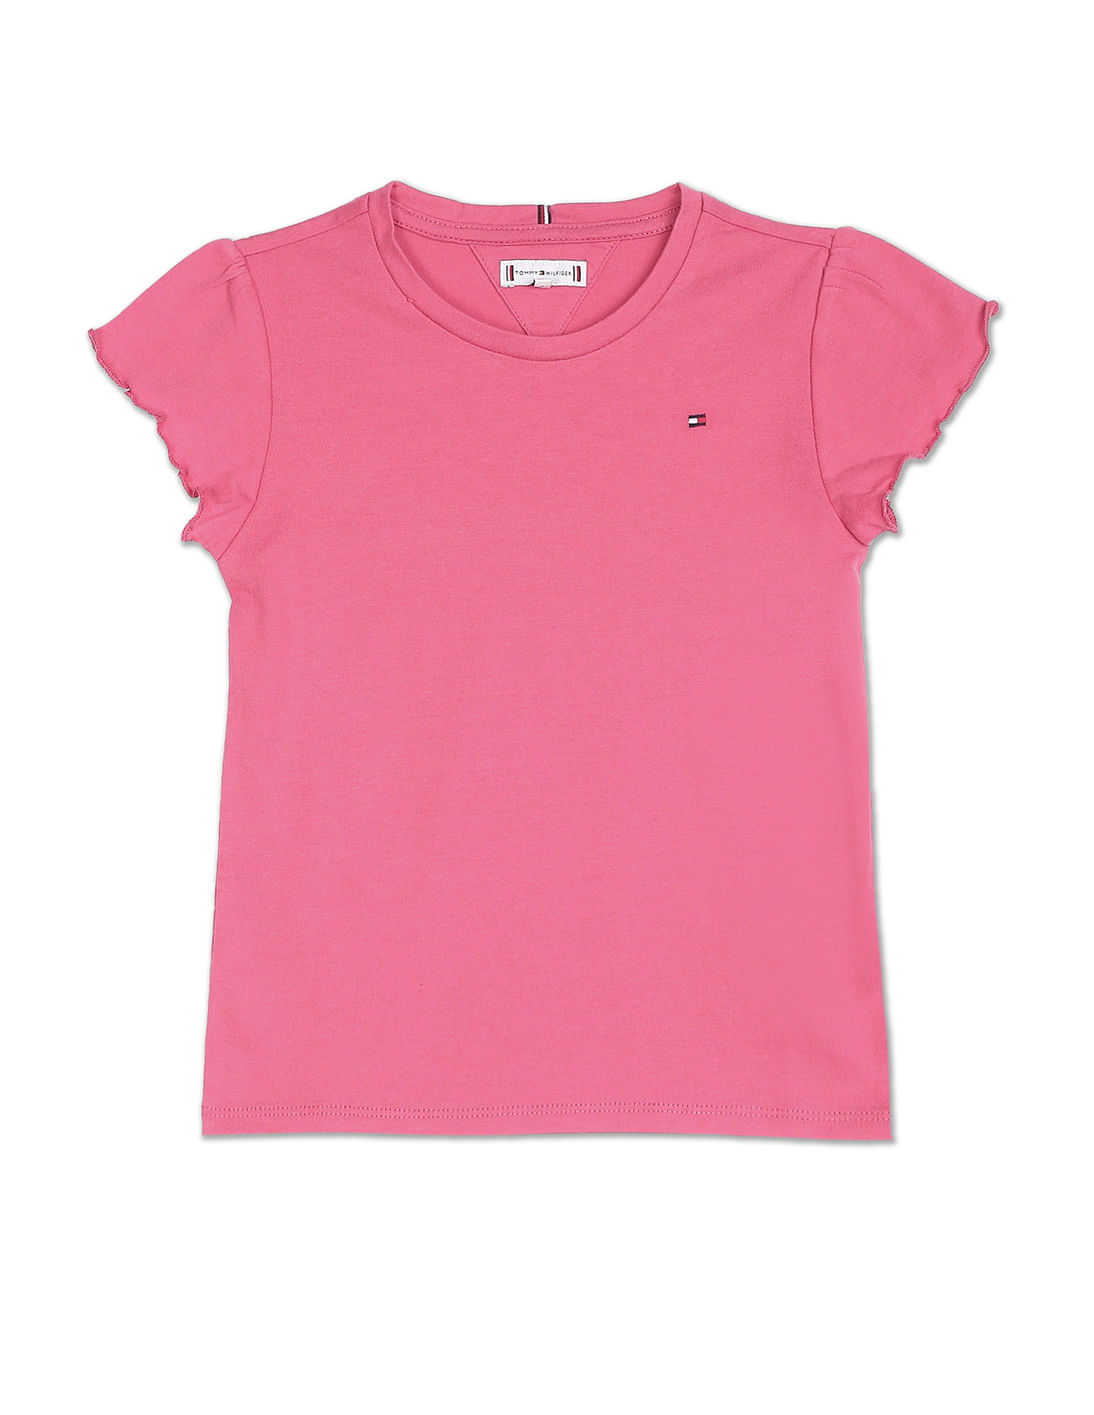 Buy Tommy Hilfiger Kids Essential Cotton Ruffle Sleeve T-Shirt